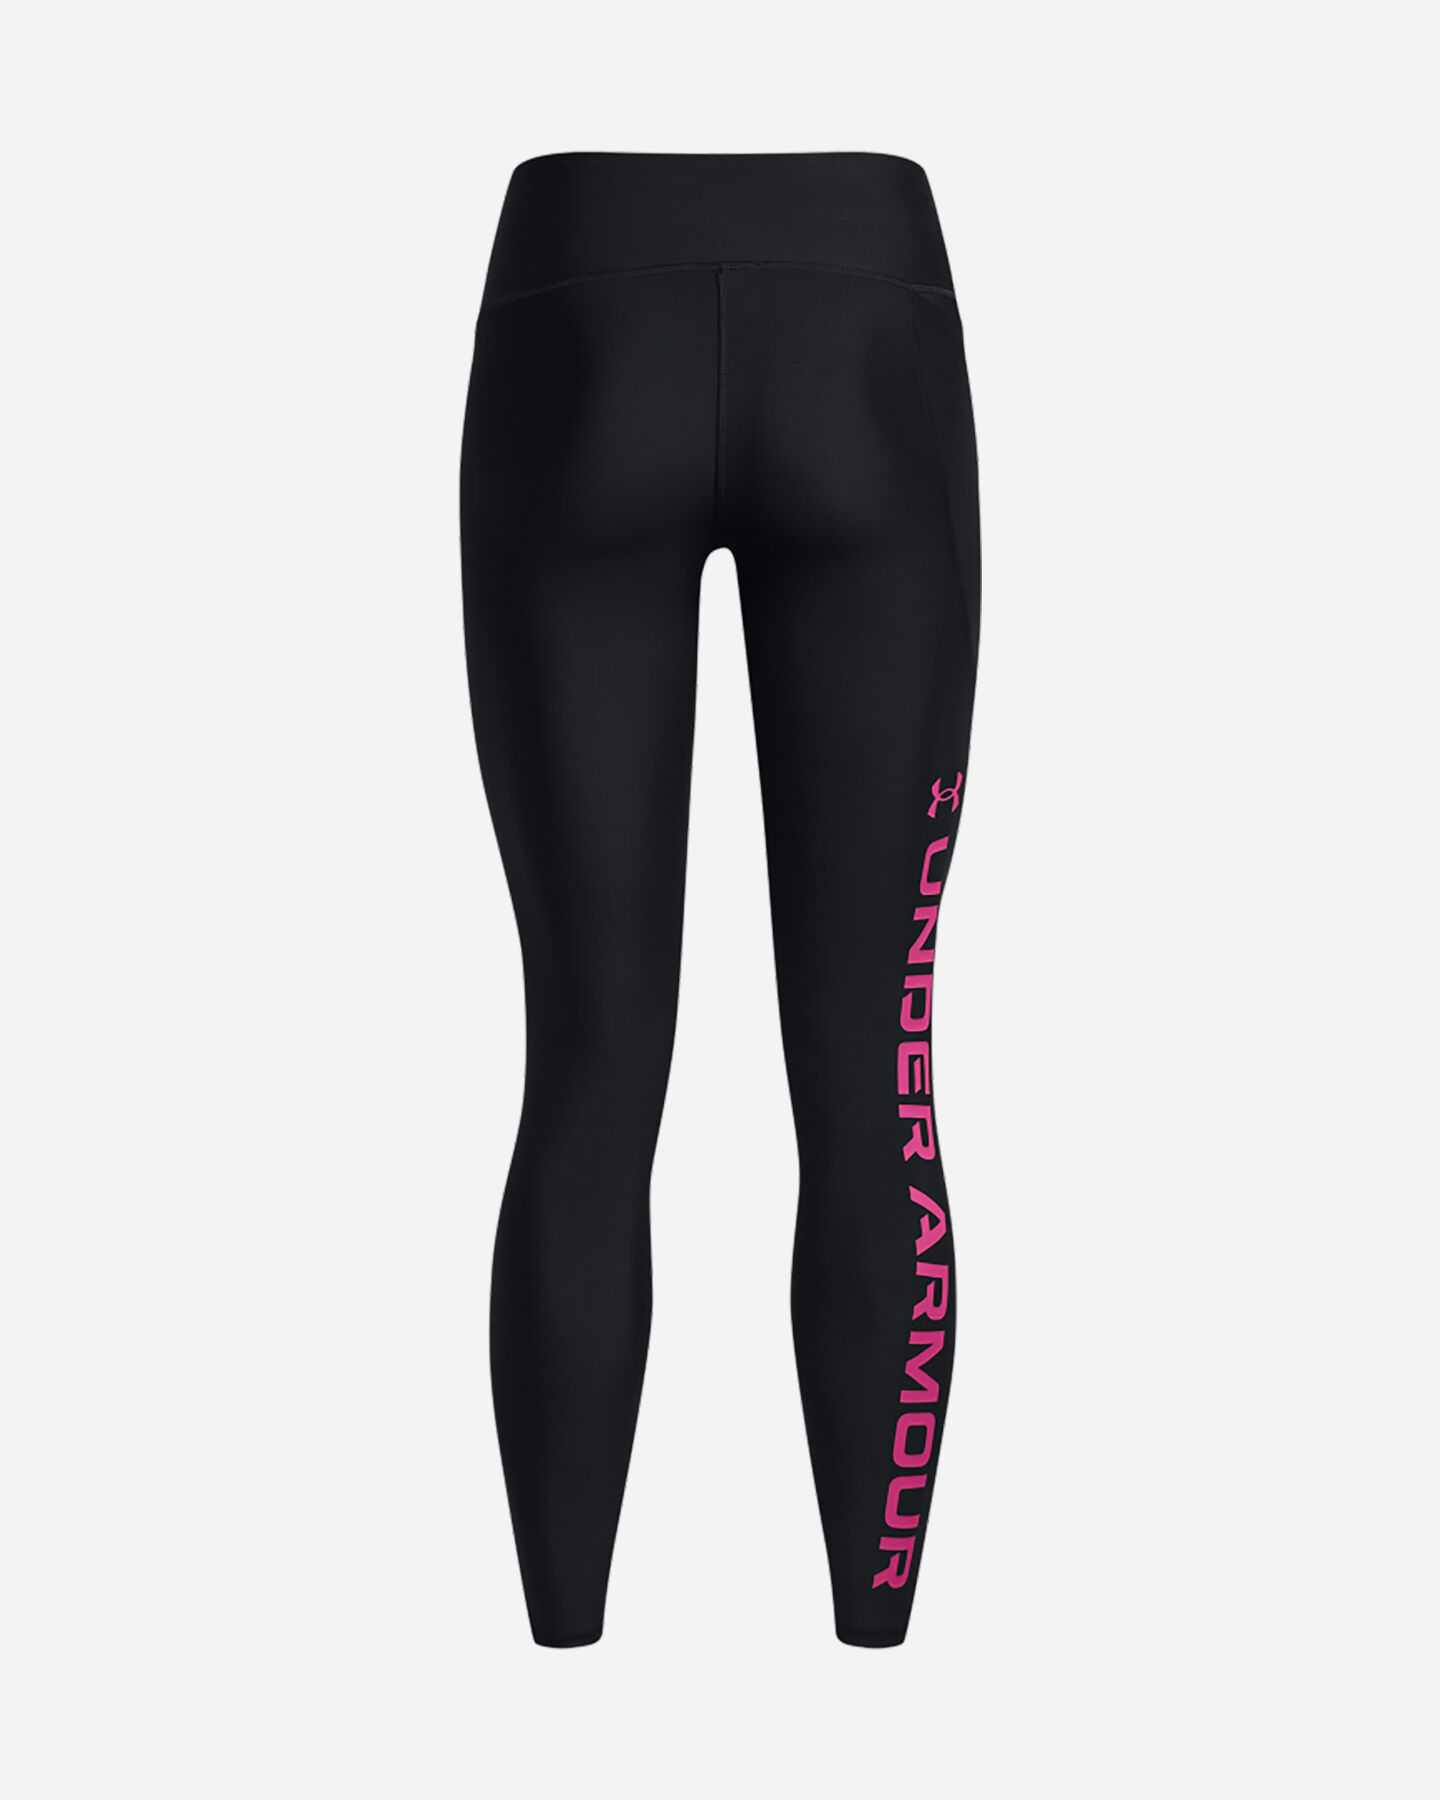  Leggings UNDER ARMOUR VANISH BRANDED W S5641031|0004|XS scatto 1